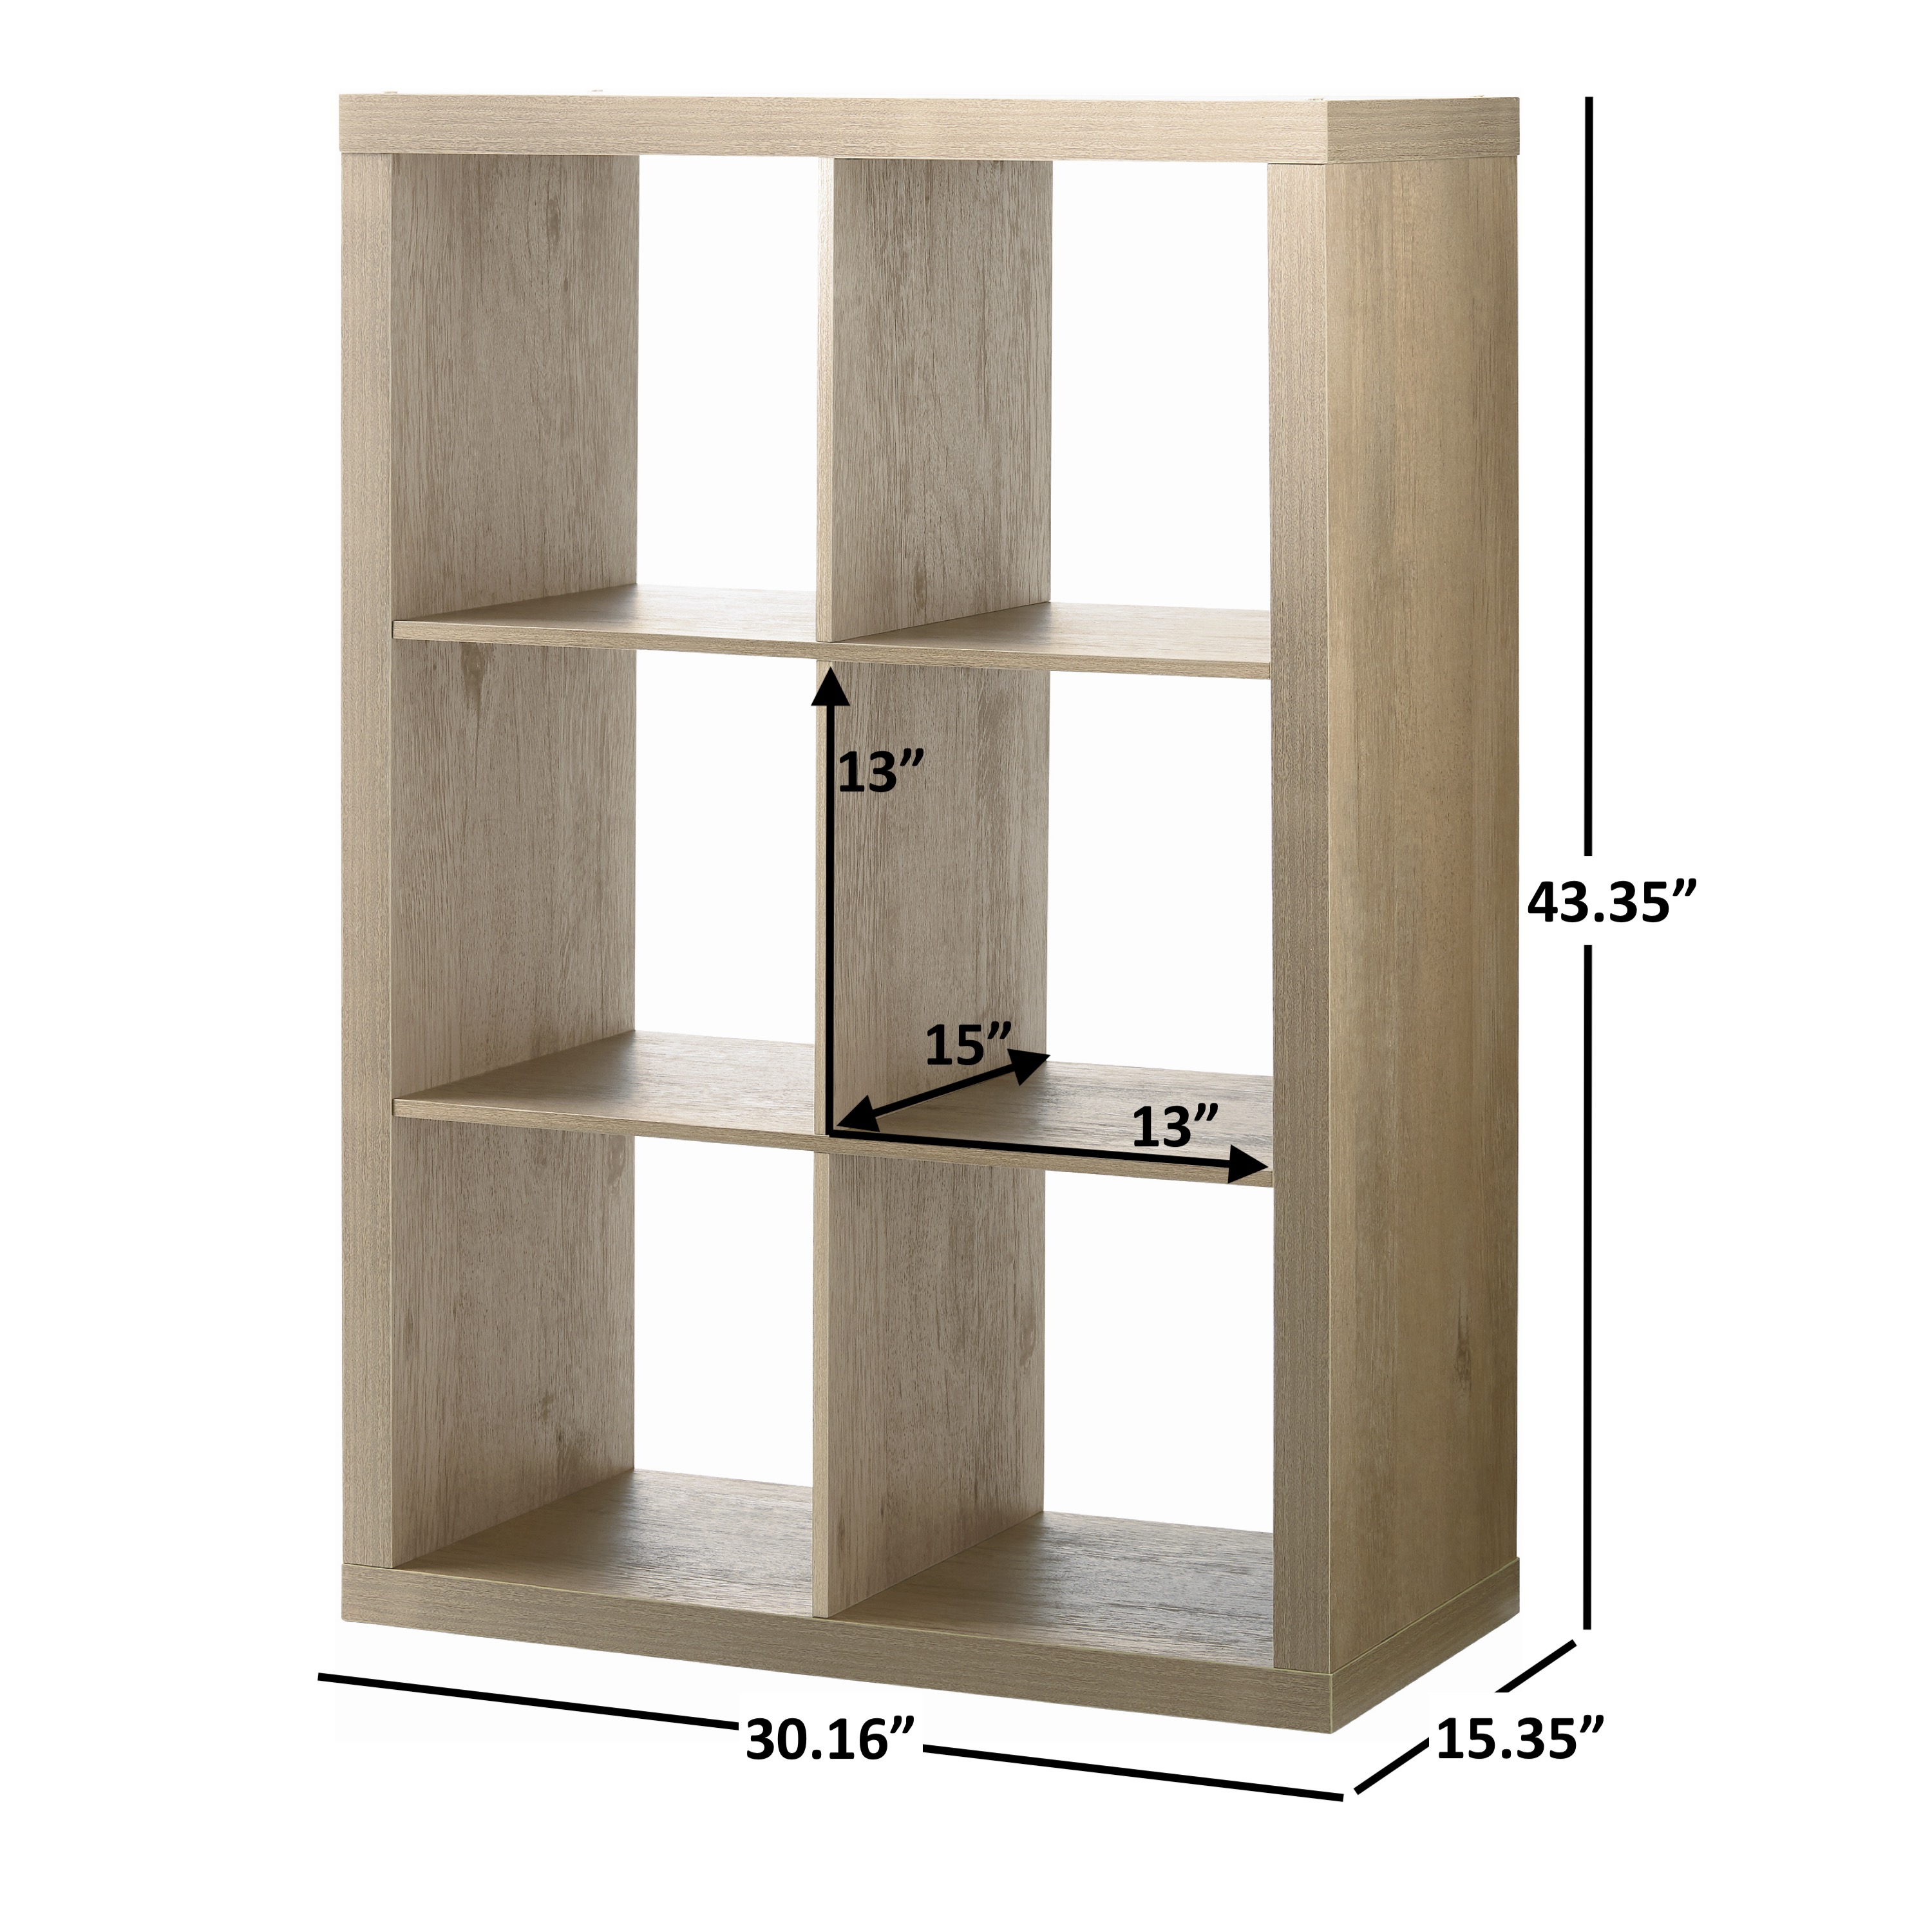 Better Homes & Gardens 6-Cube Storage Organizer, Natural - image 2 of 7